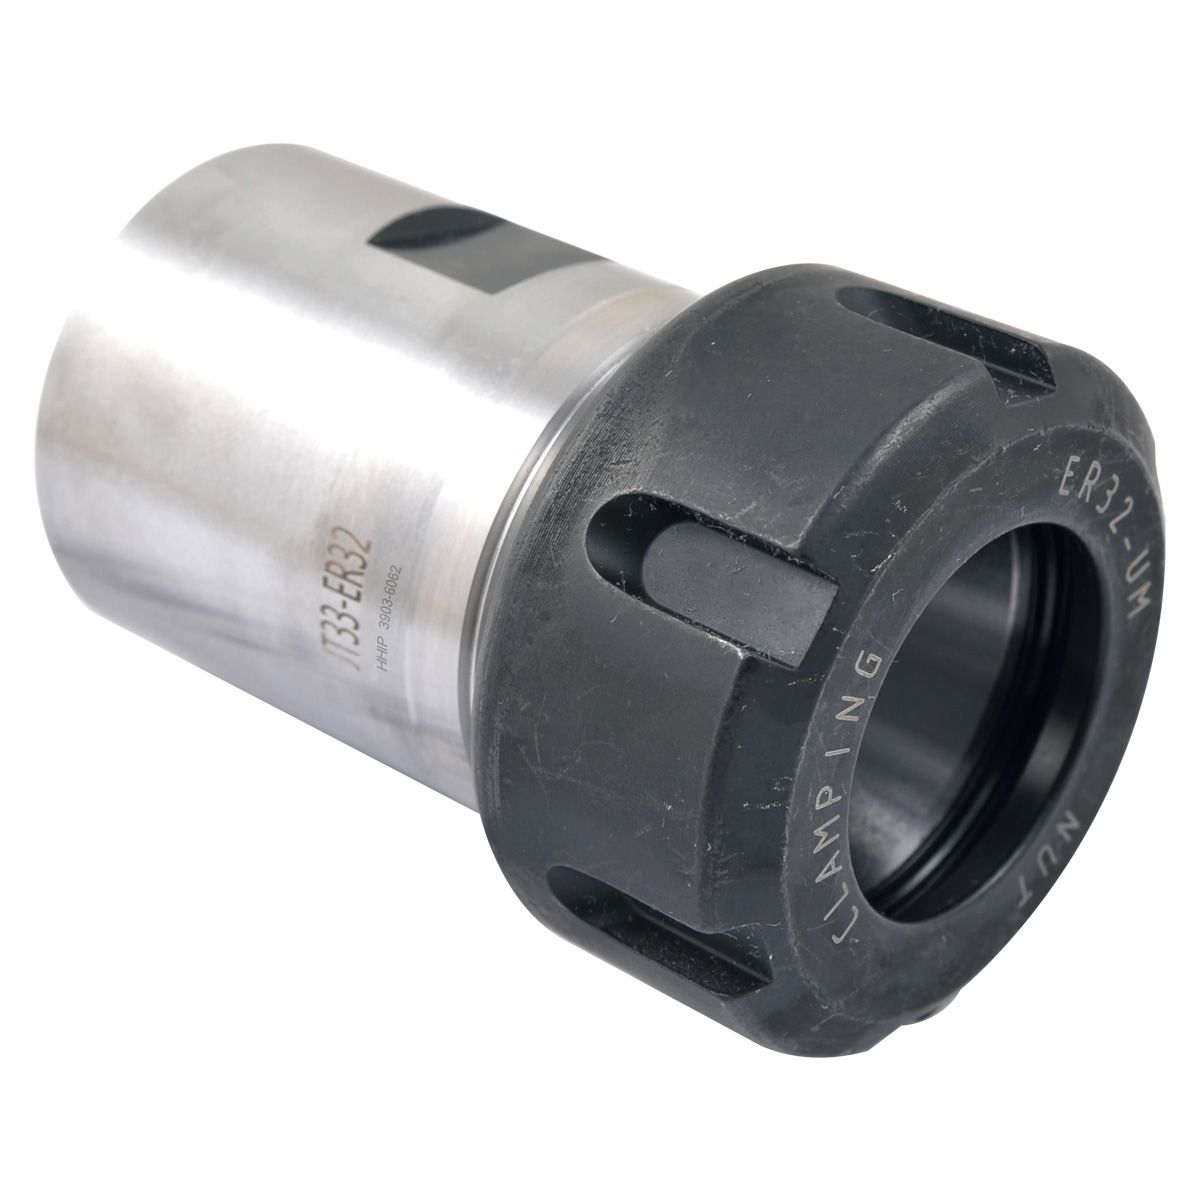 ER16 COLLET & DRILL CHUCK WITH JT6 SLEEVE (3903-6070)